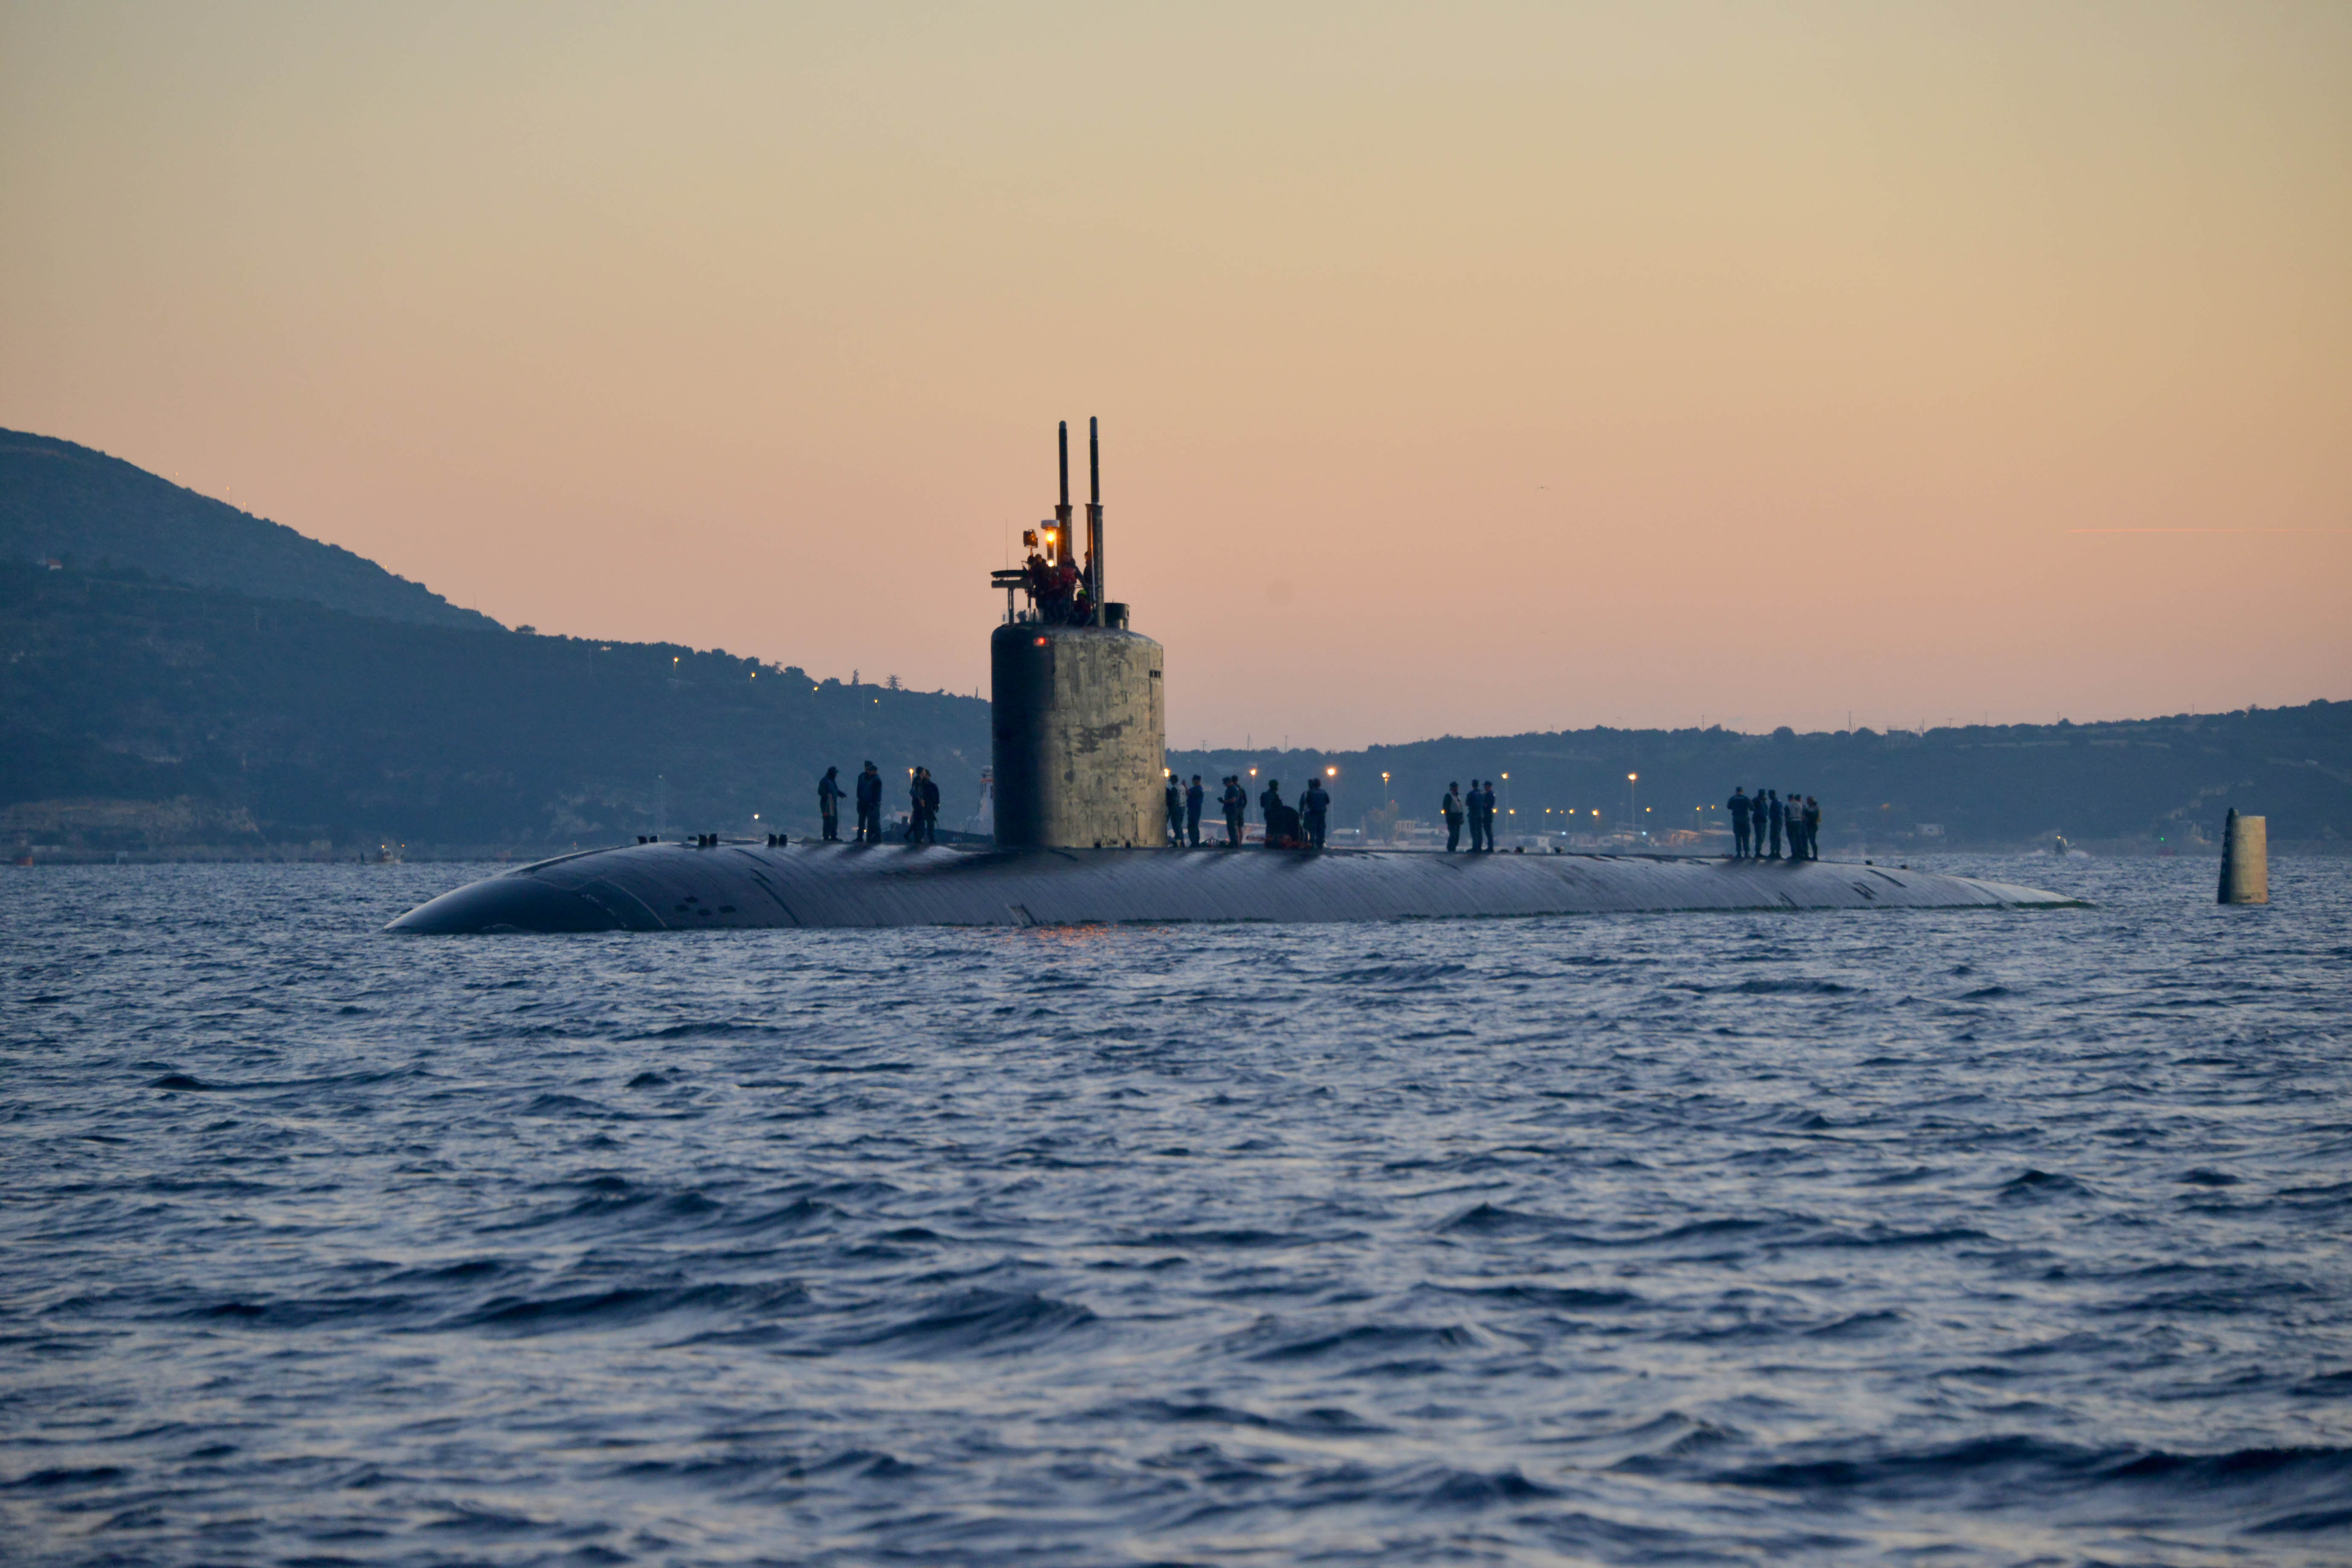 Los Angeles-class attack submarine USS Boise (SSN-764) enters Souda Bay, Greece in 2014. US Navy Photo